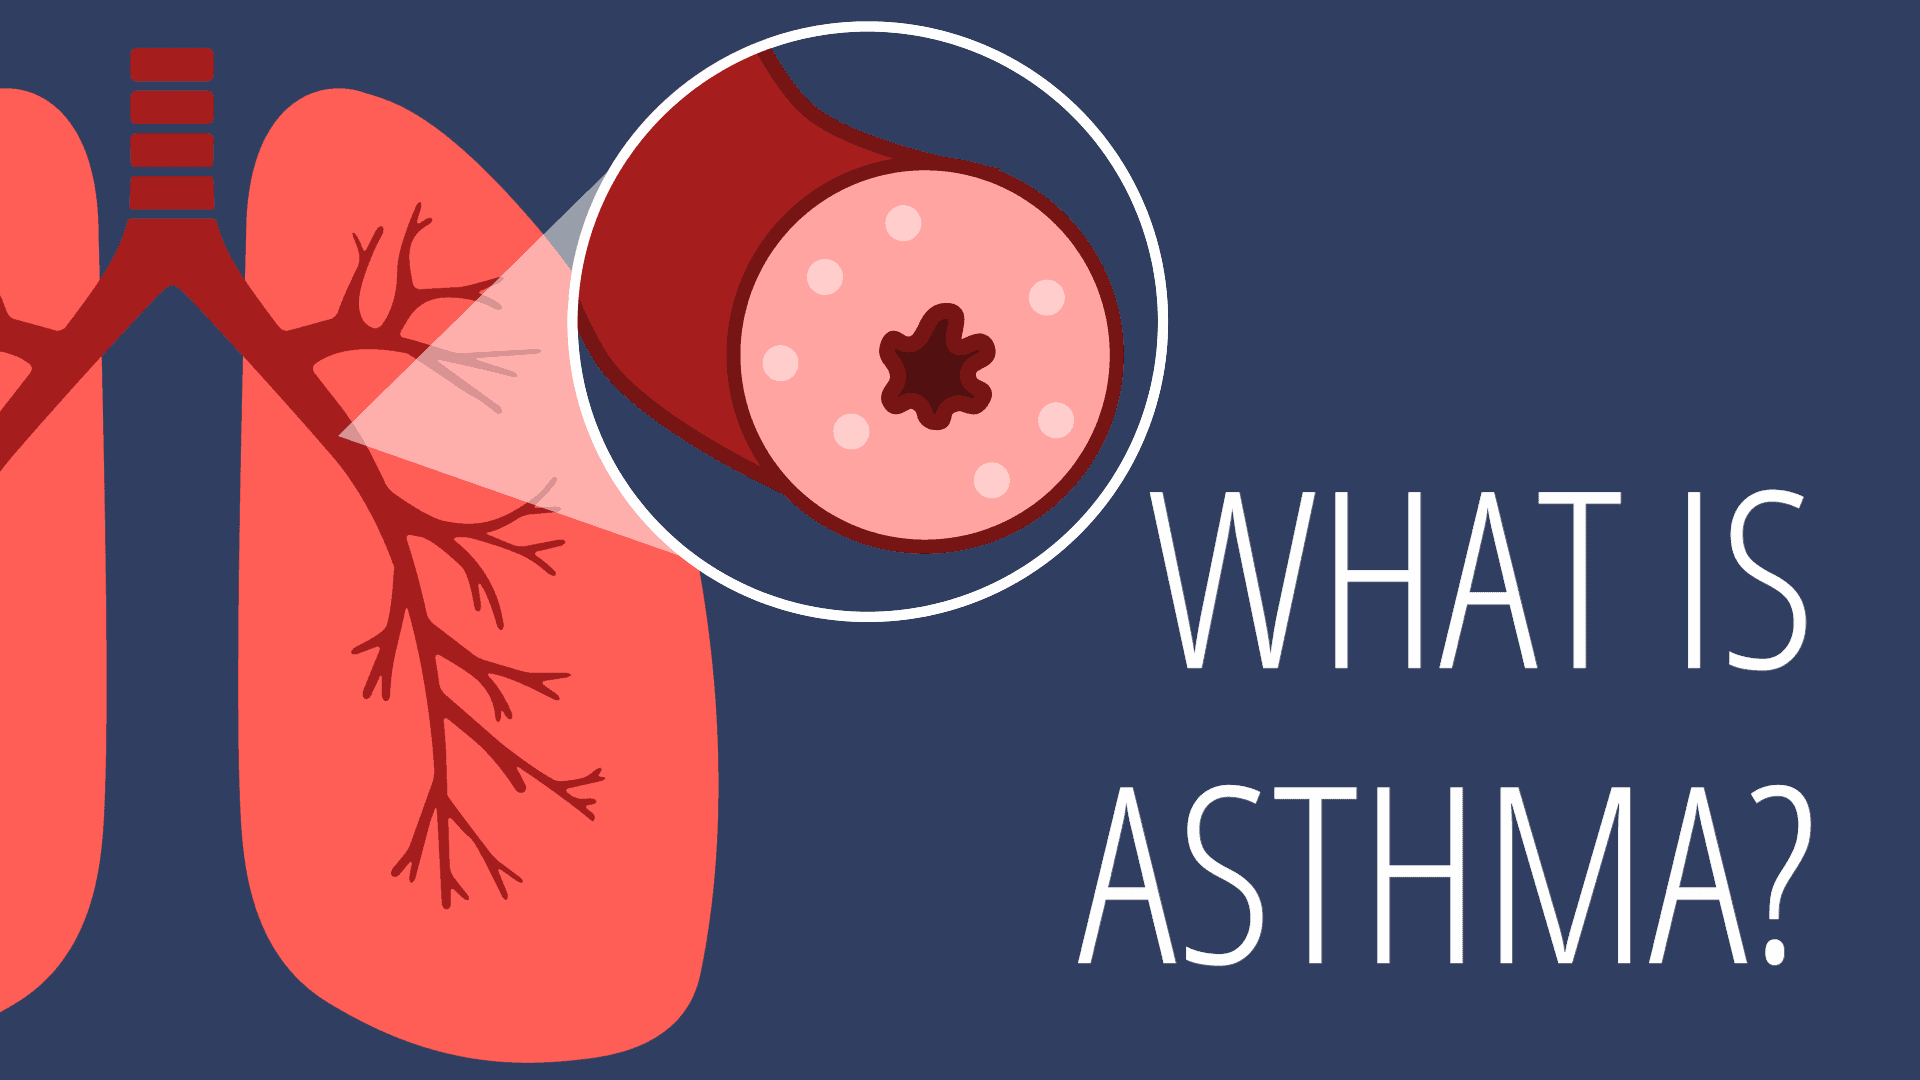 What Is Asthma?